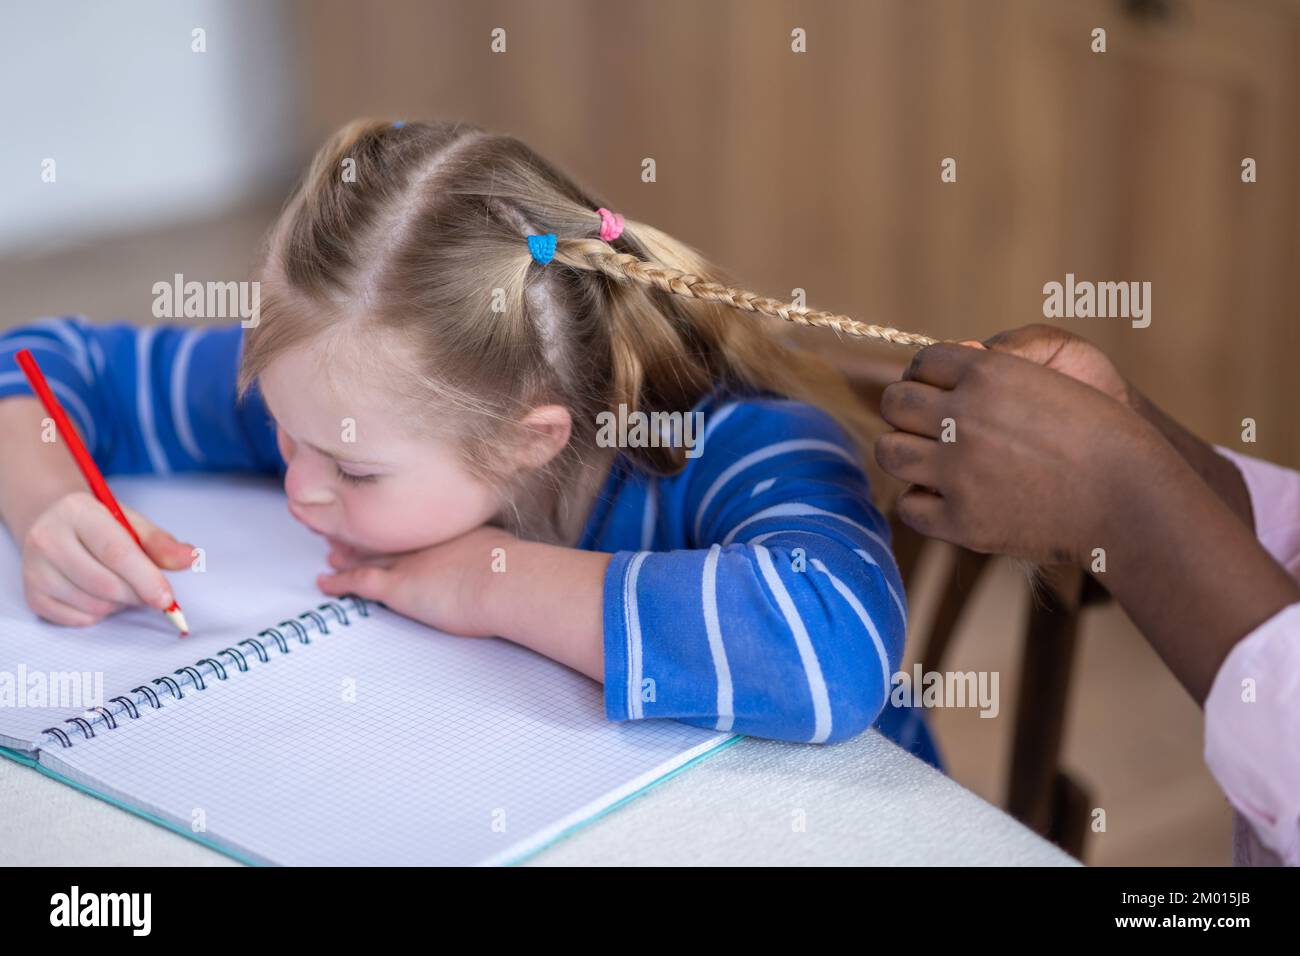 Hairstyle. Close up picture of females hands making pigtail to the girl. Stock Photo